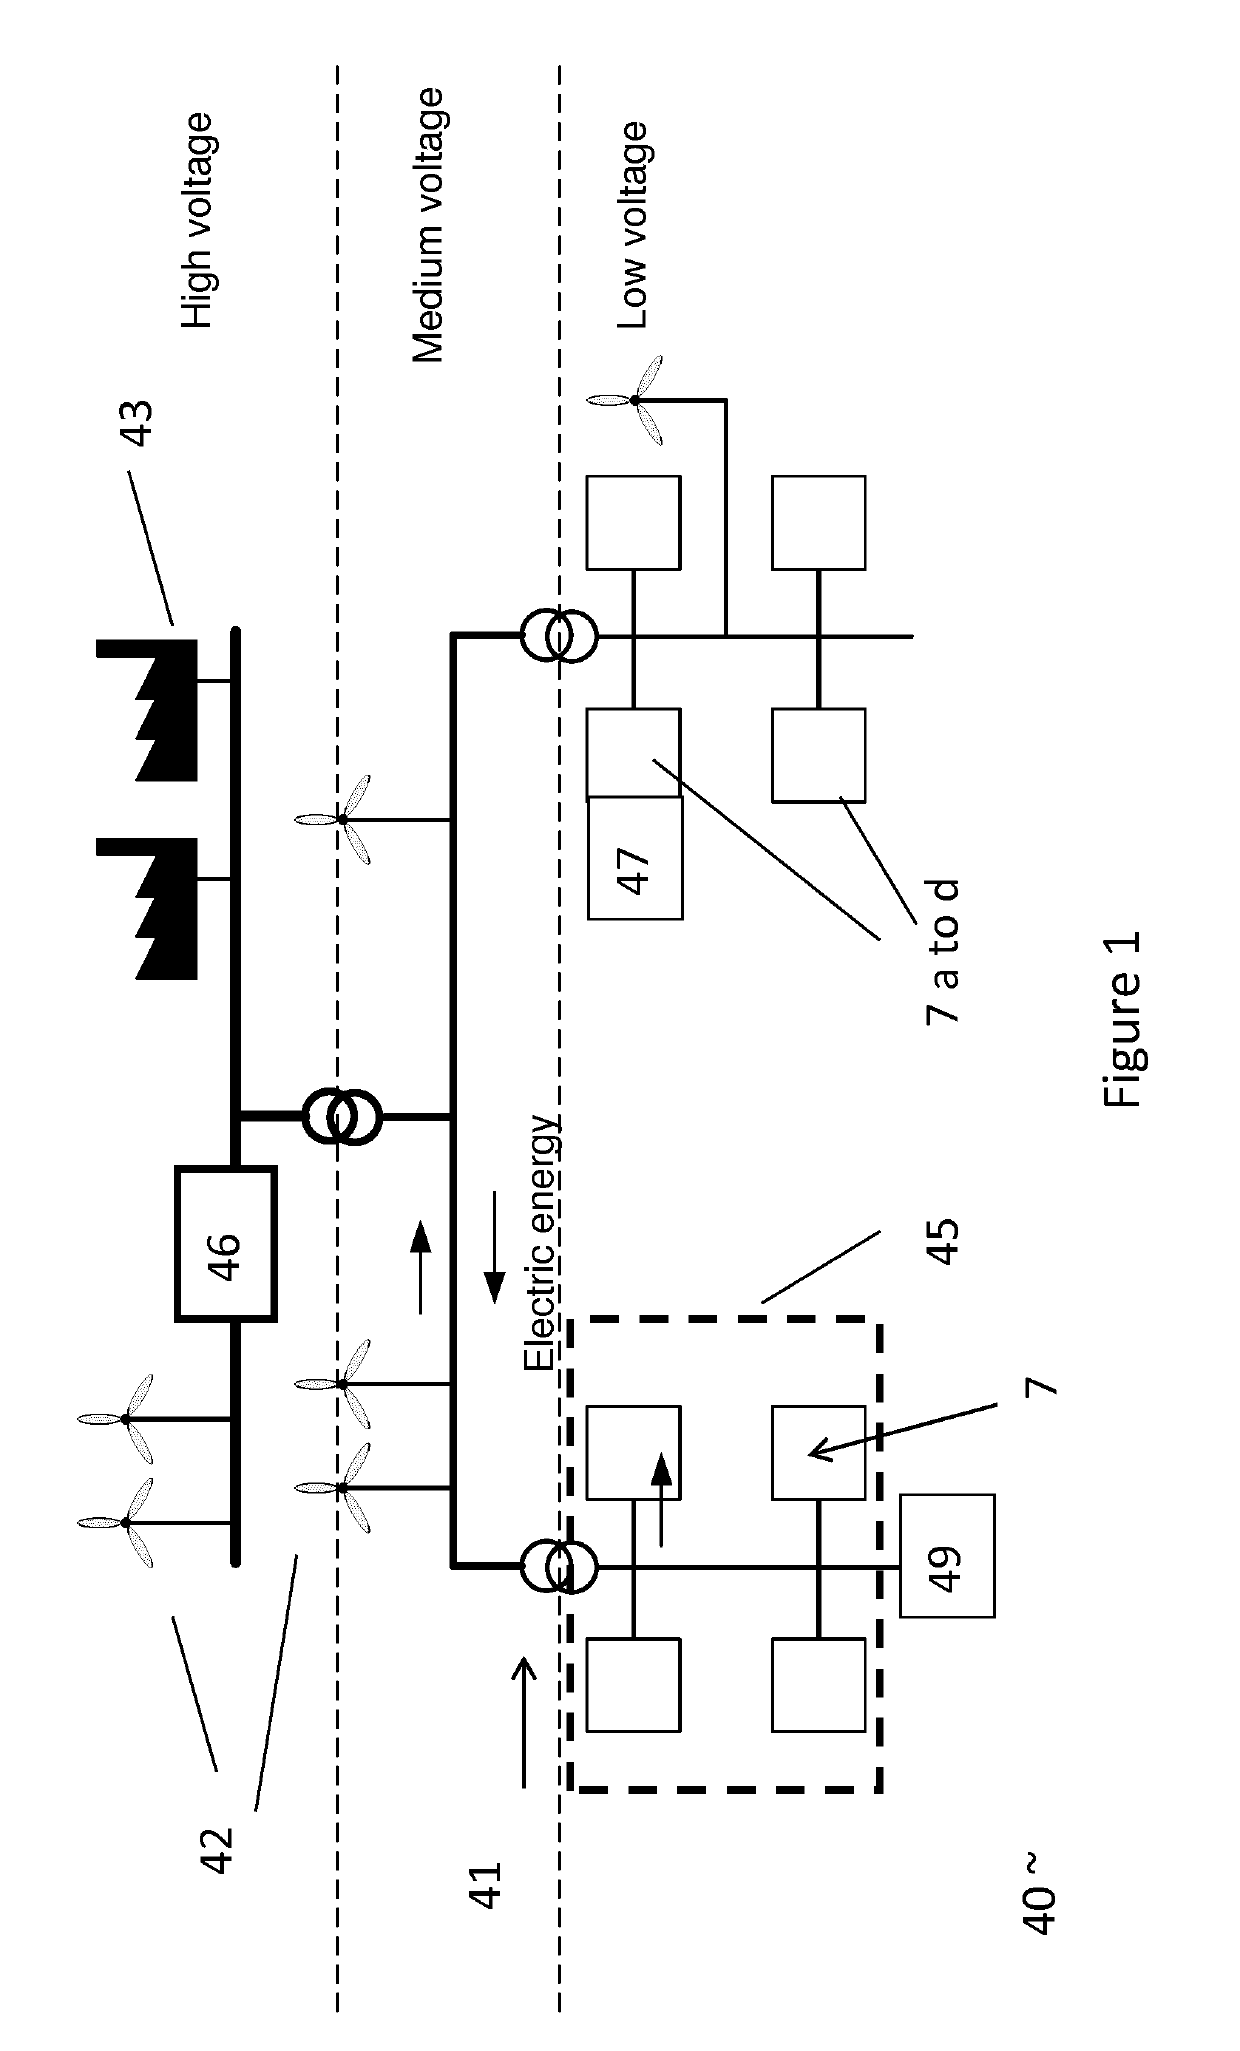 Cluster control of heterogeneous clusters of thermostatically controlled loads using tracker devices